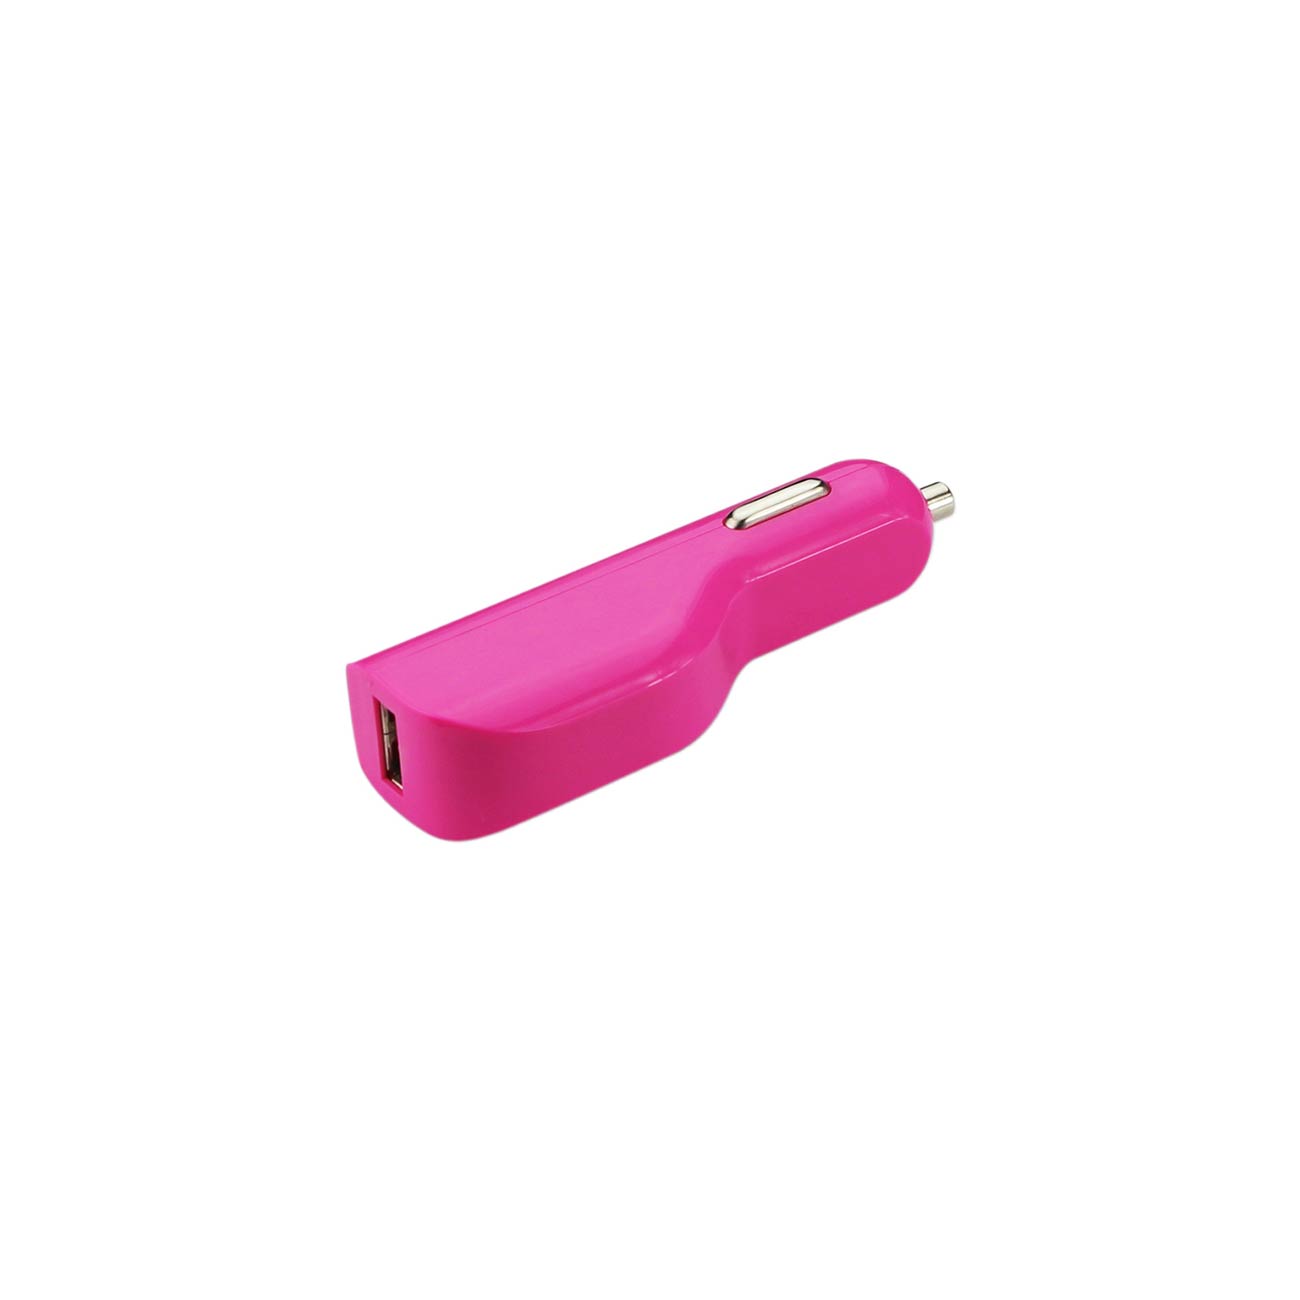 Micro USB 1 AMP Car Charger In Hot Pink